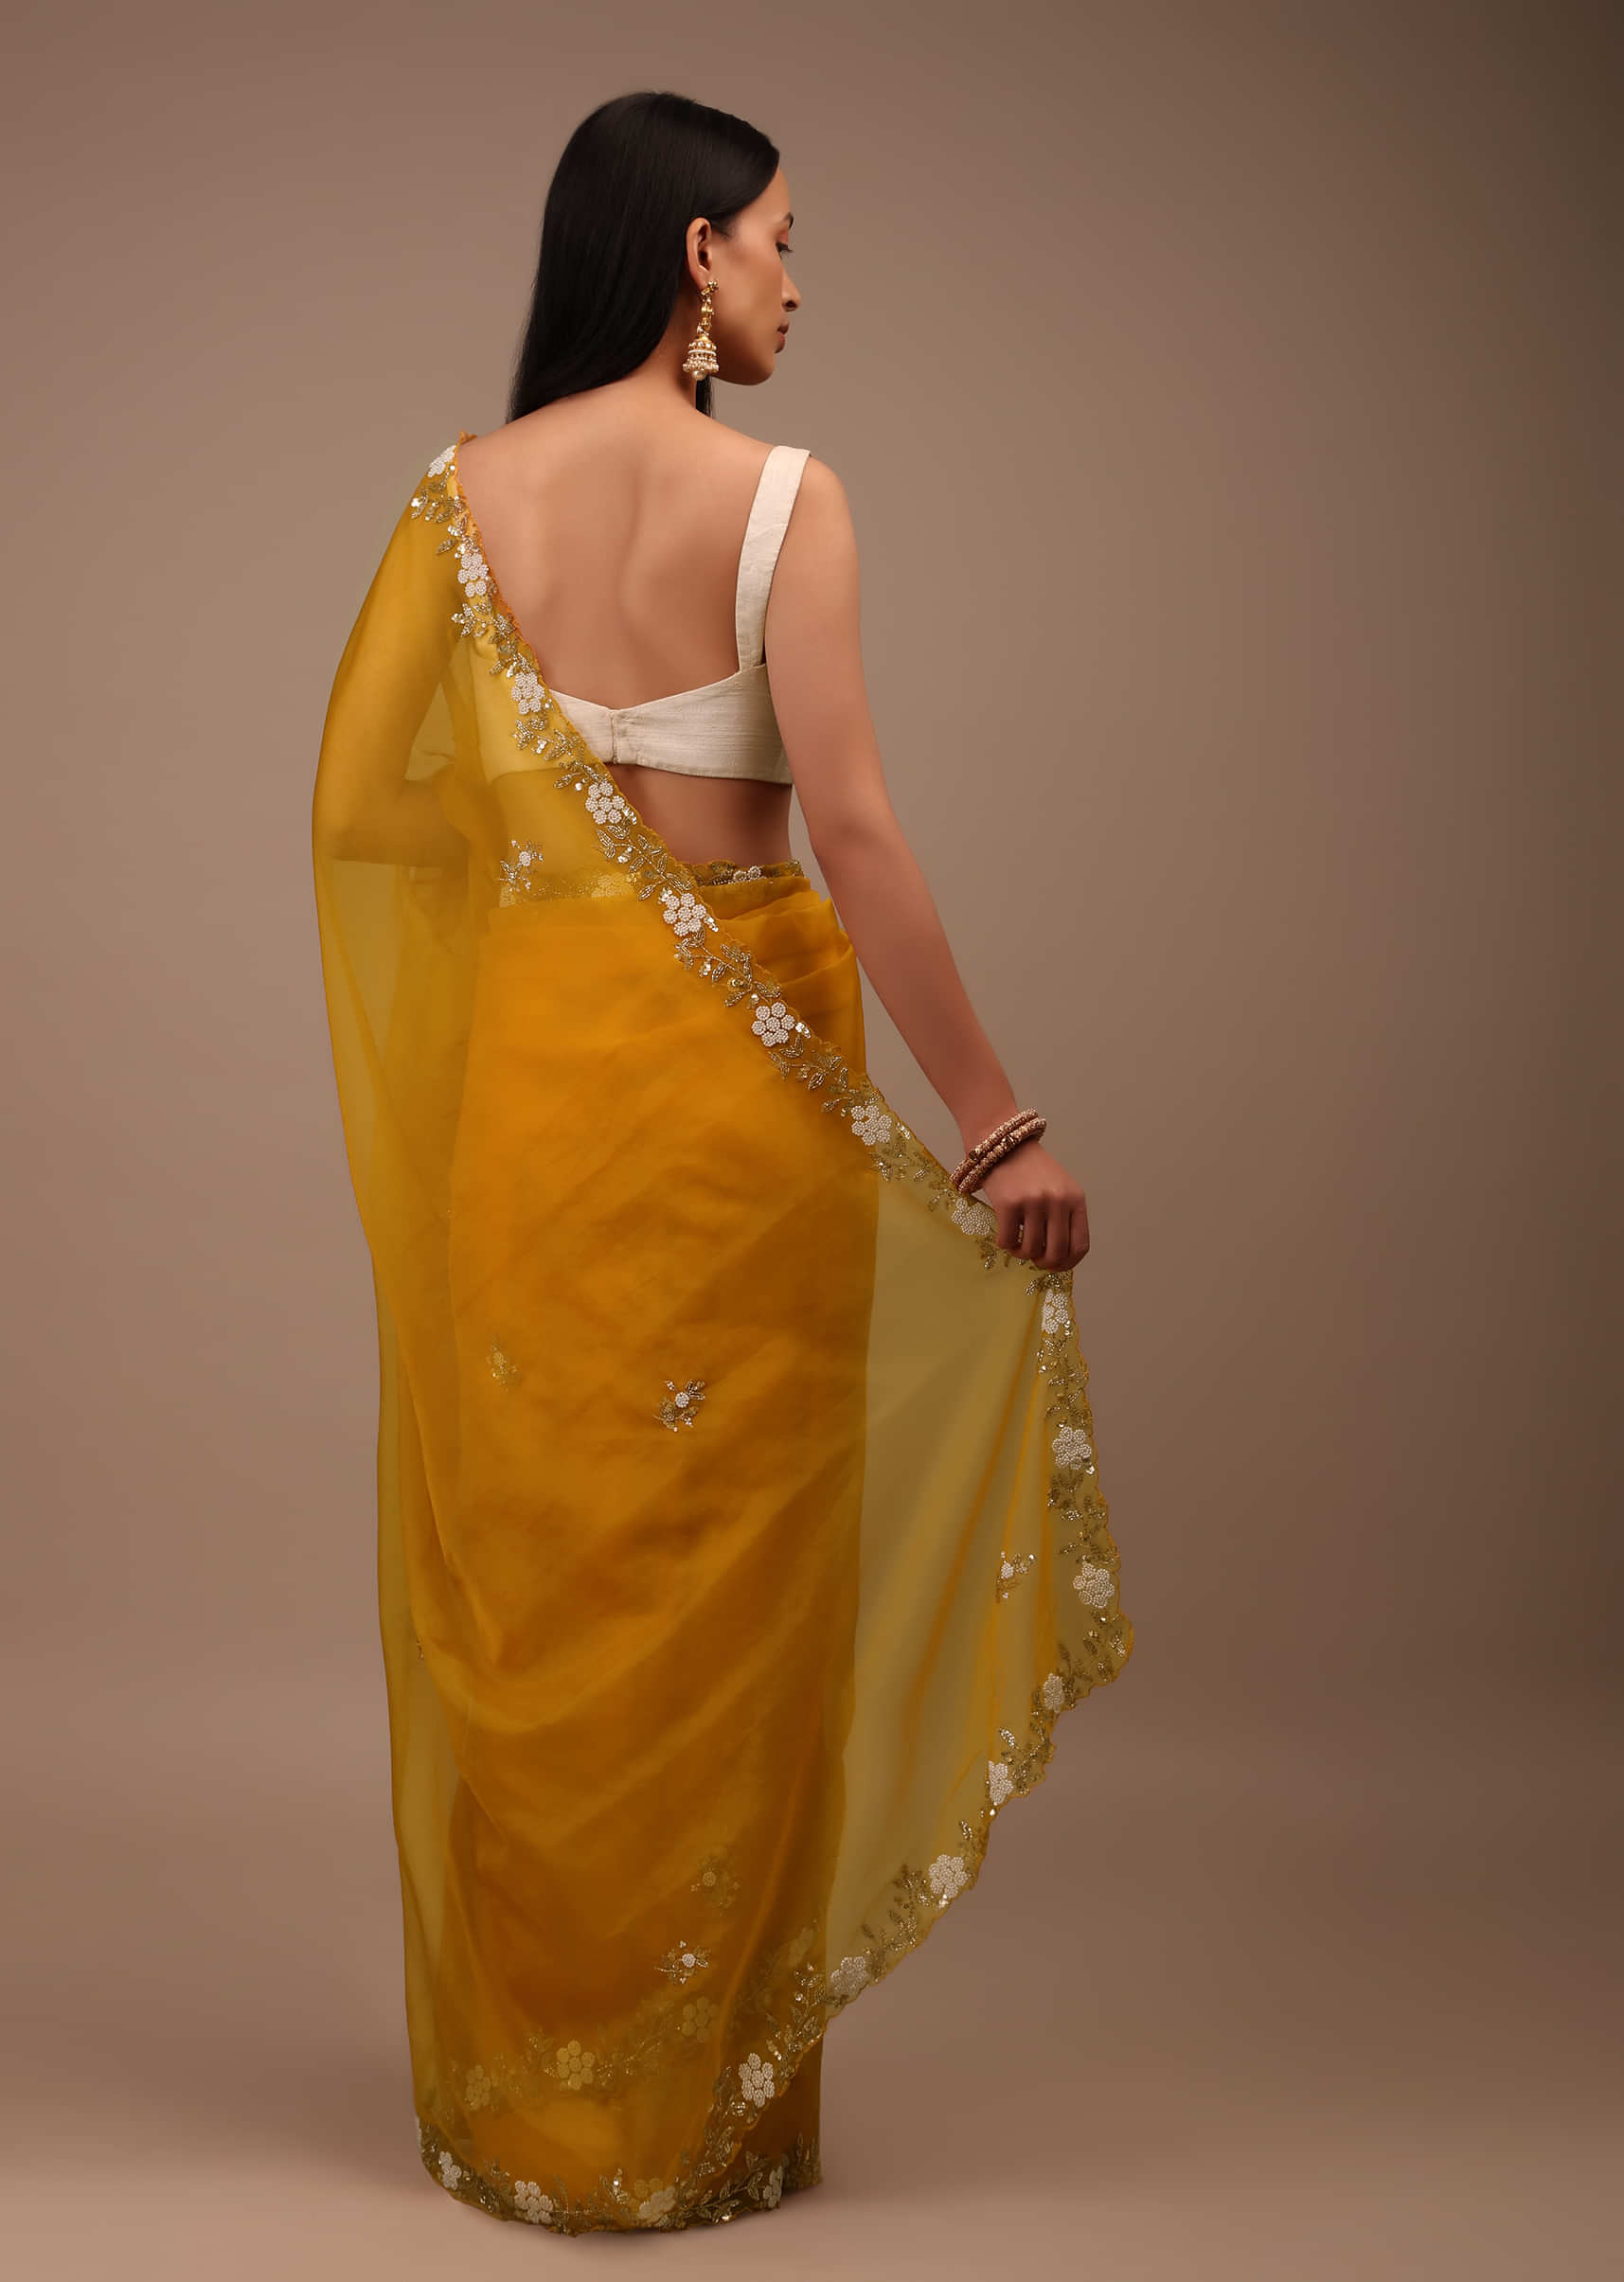 Butterscotch Yellow Saree In Organza With Hand Embroidered Moti And Cut Dana Work On The Border And Butti Design